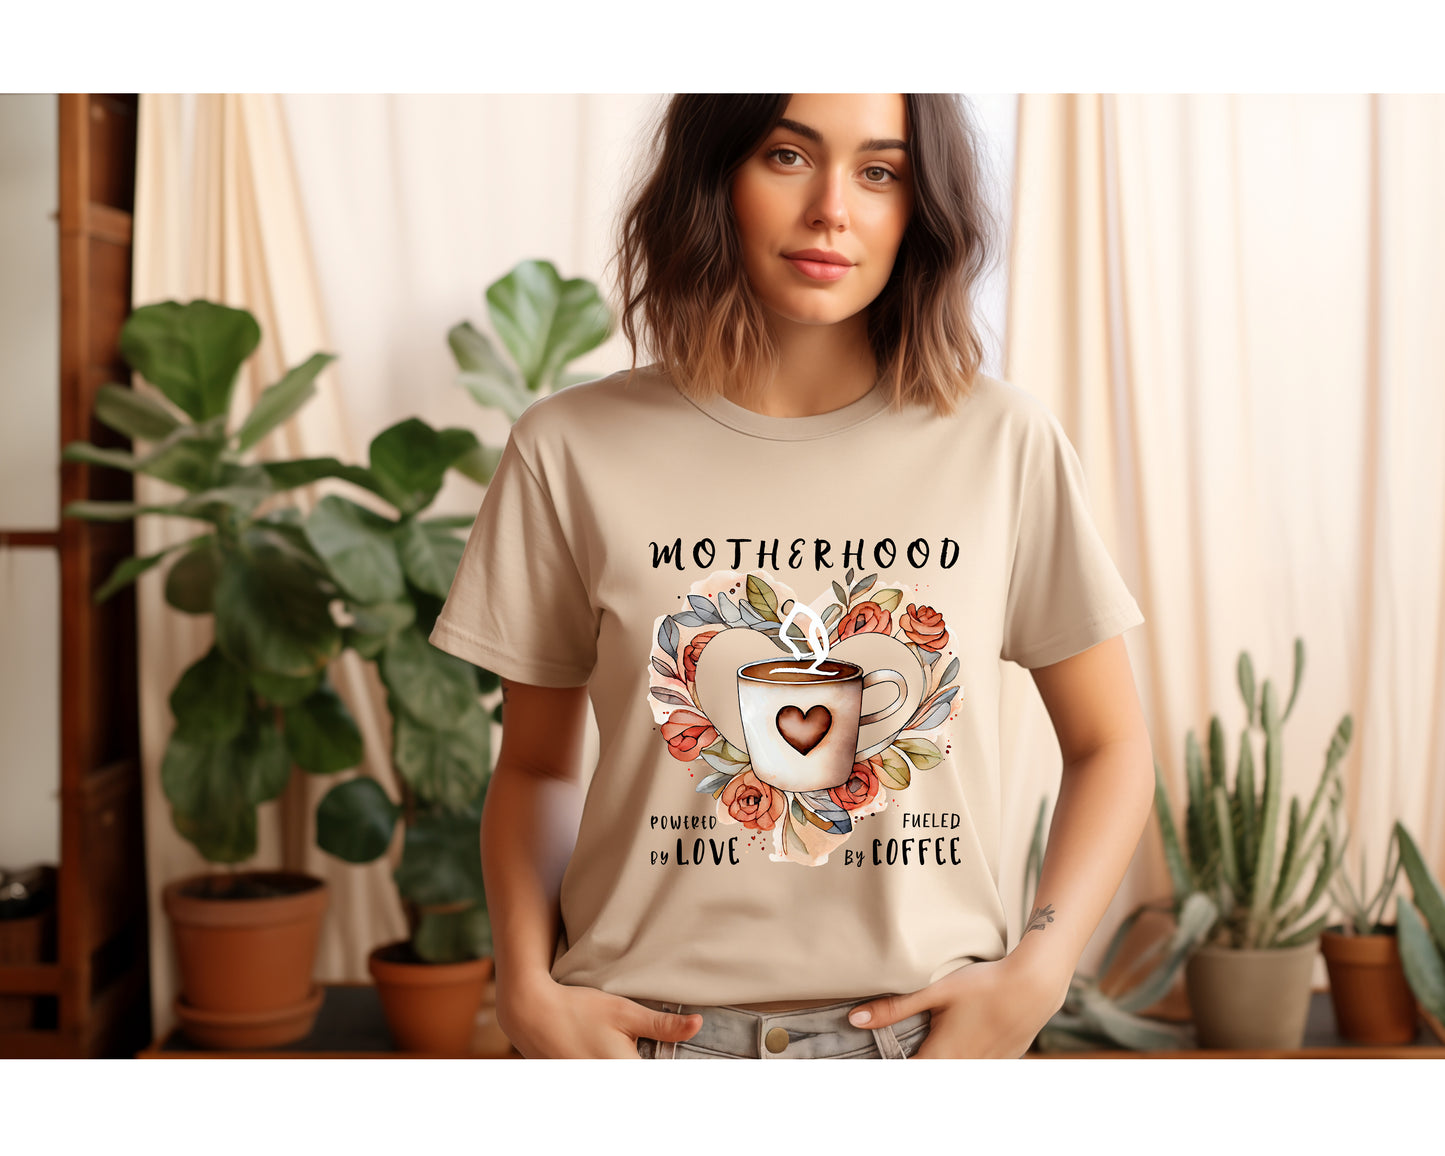 Motherhood Shirt, Powered by Love Fueled by Coffee, T Shirt